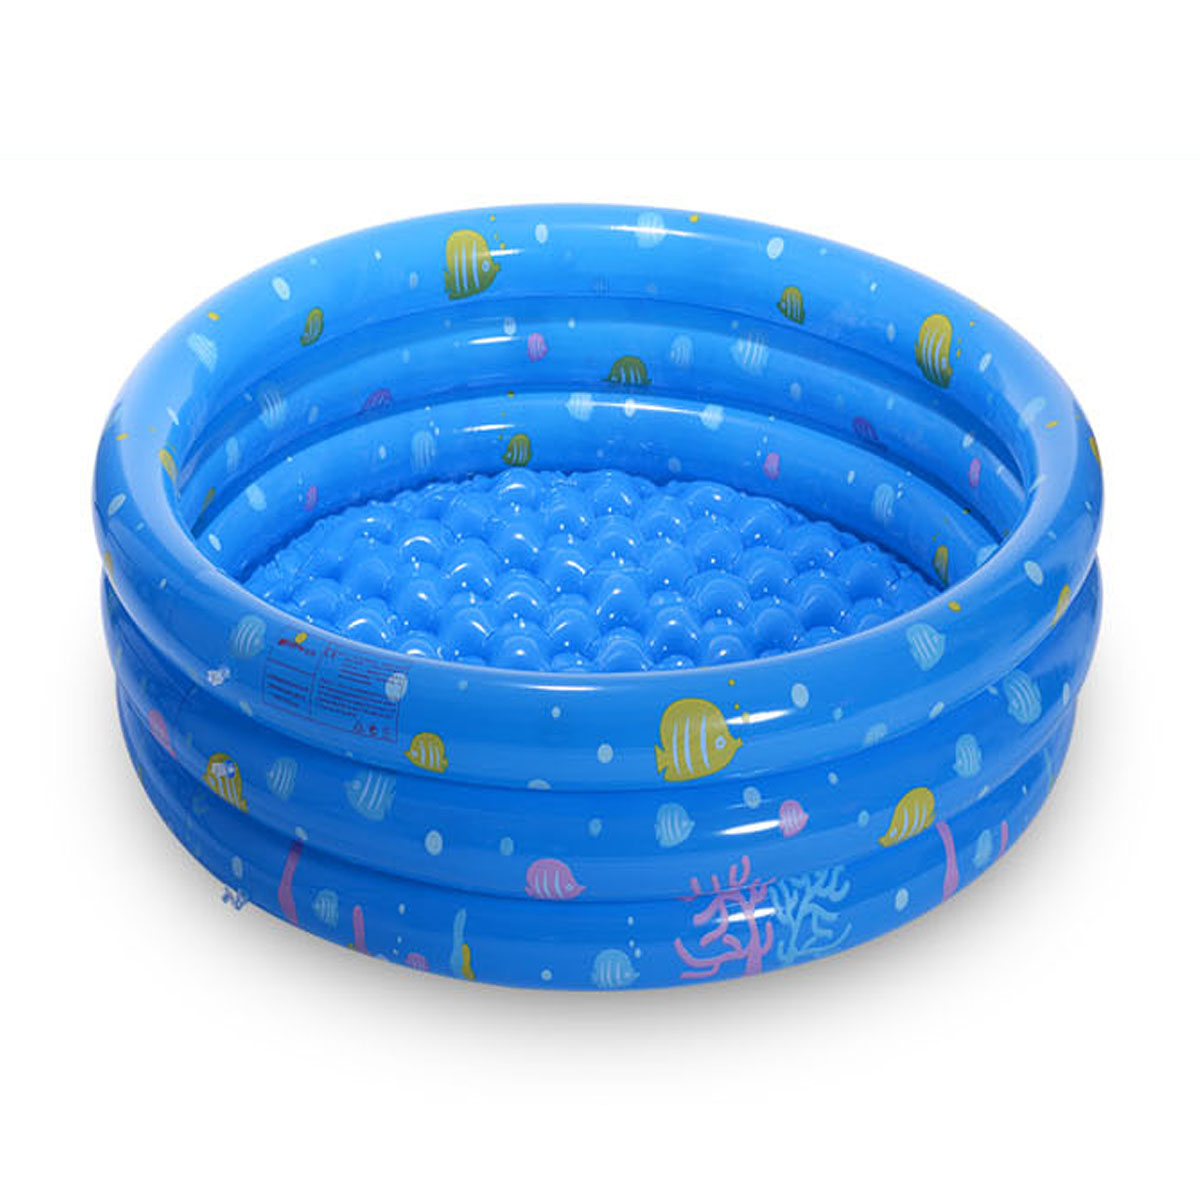 Inflatable-Swimming-Pool-Portable-Outdoor-Children-Basin-Bathtub-Kids-Pool-Baby-Swimming-Pool-Water--1528022-4